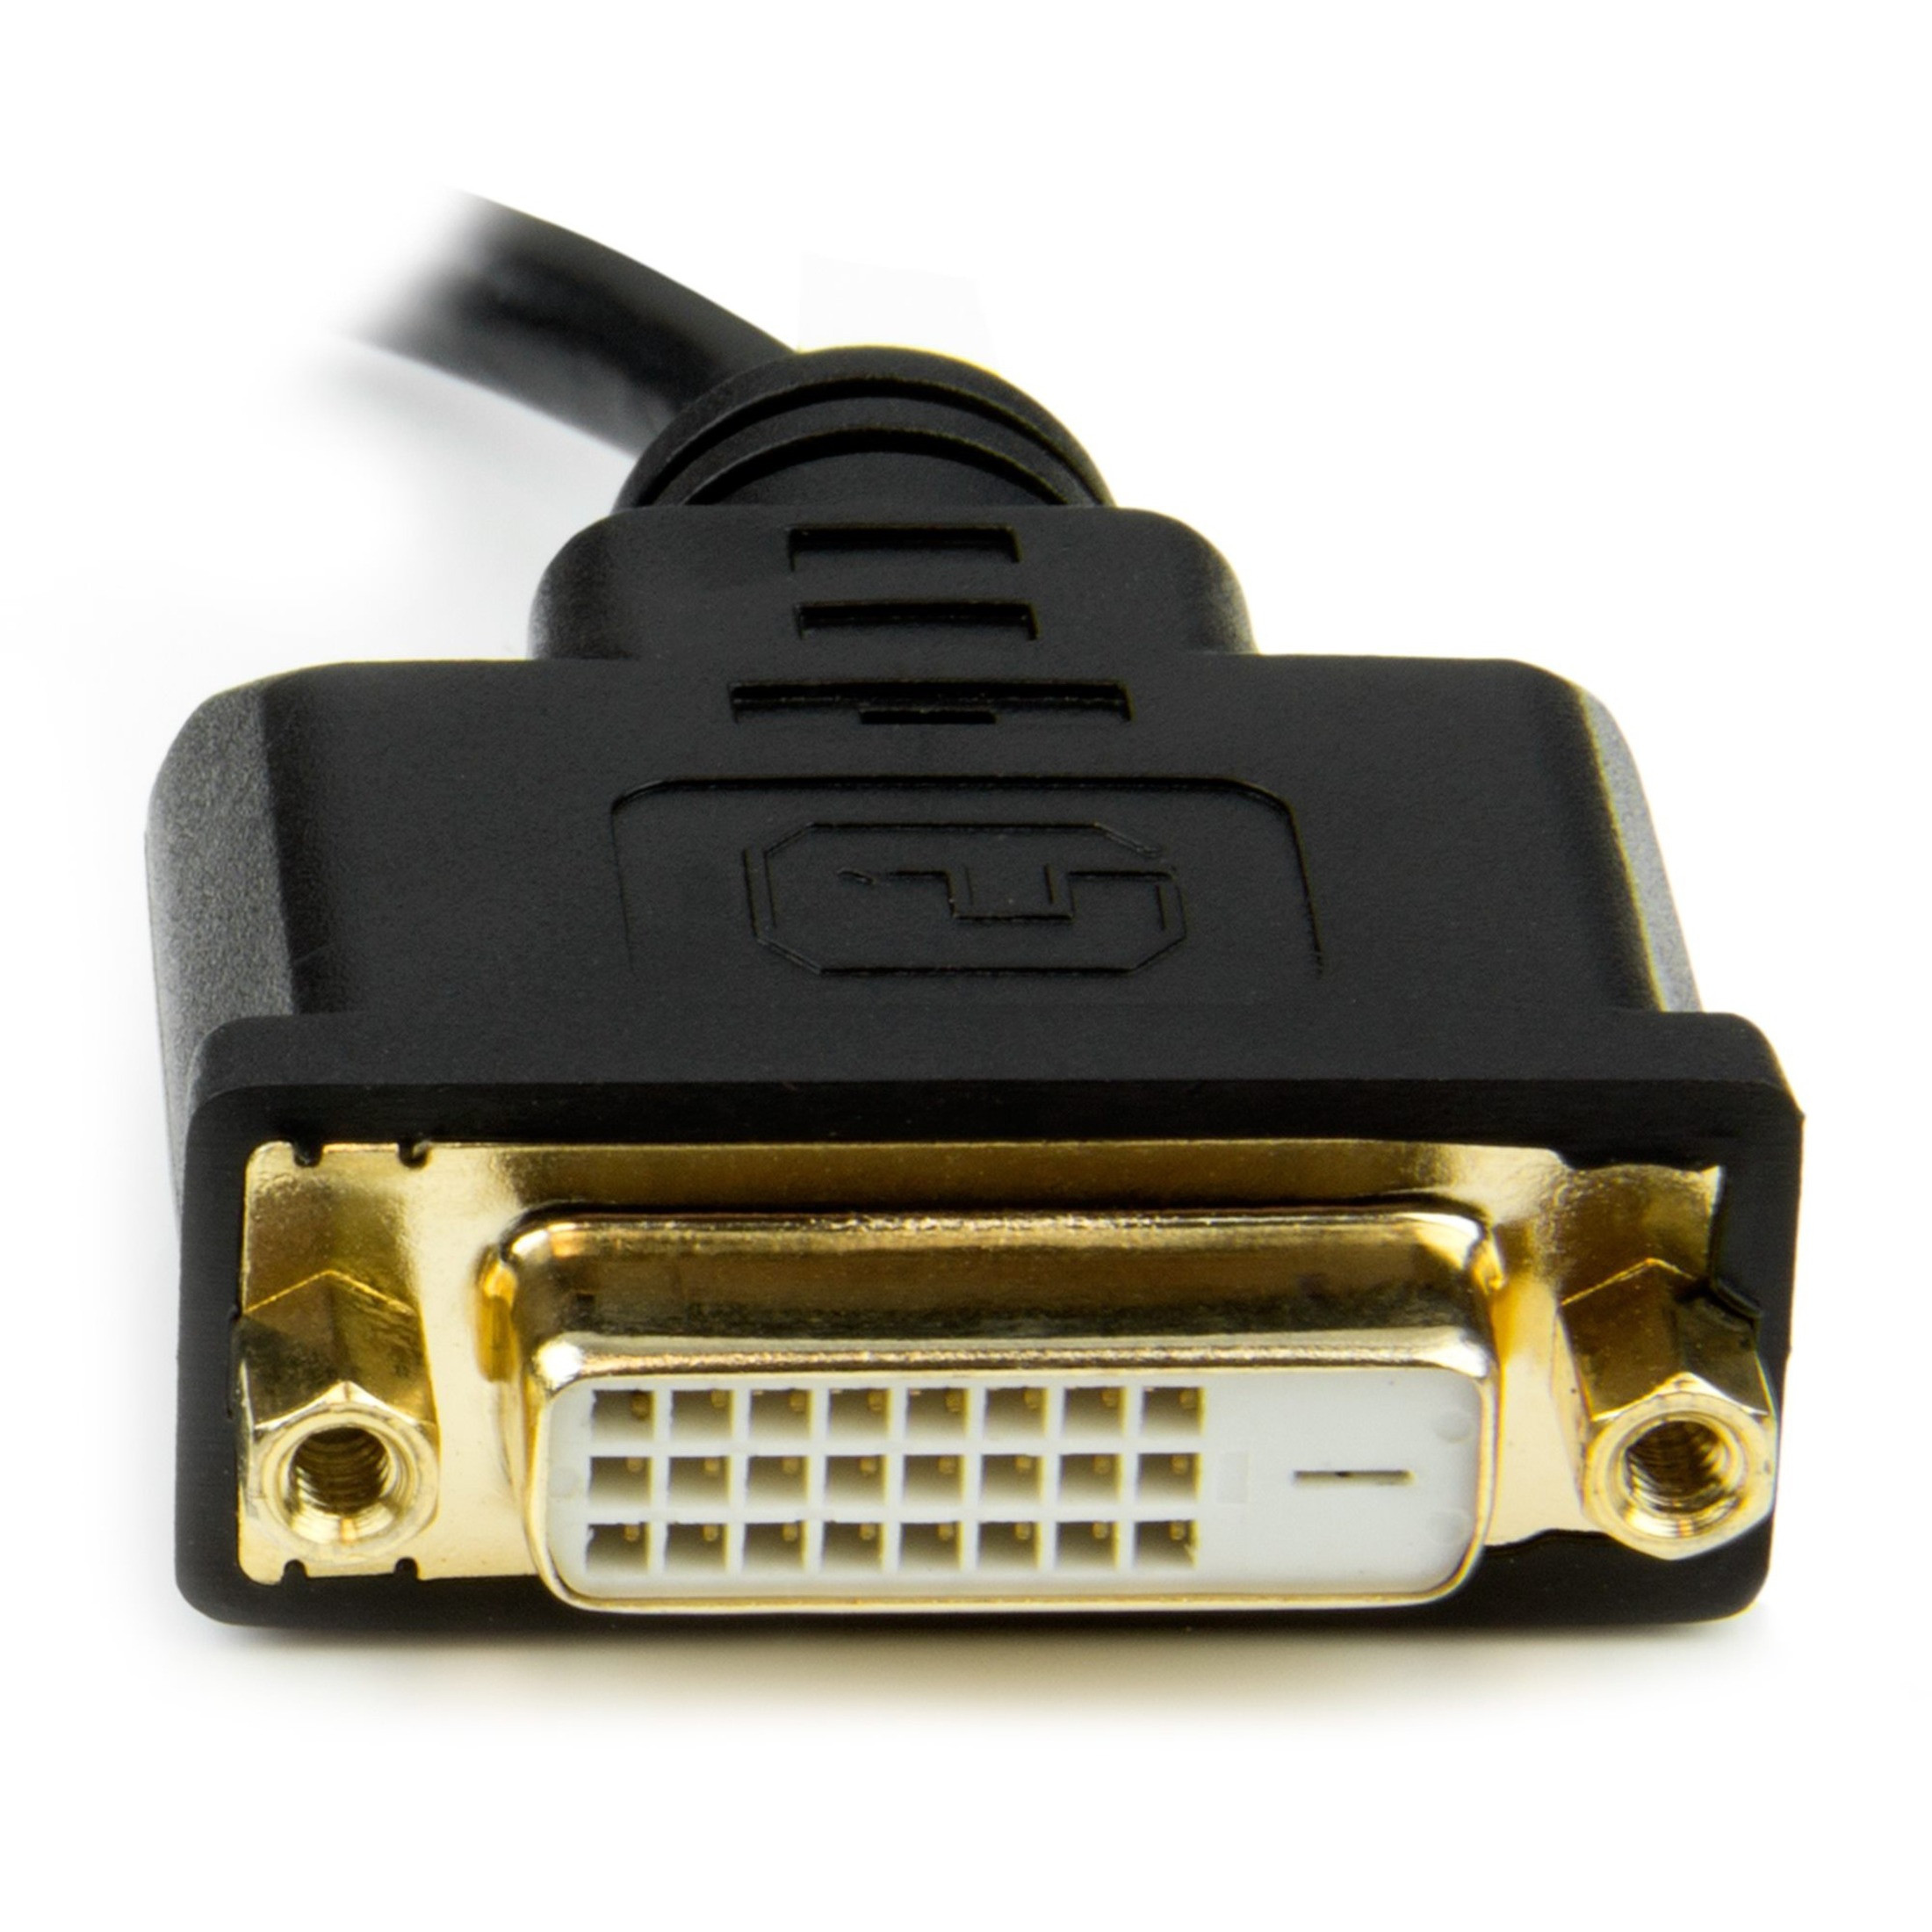 synge komme ud for Insister Startech .com 8 in (20cm) Mini HDMI to DVI Cable, DVI-D to HDMI Cable  (1920x1200p), HDMI Mini Male to DVI-D Female Display Cable Adapter8i...  HDCDVIMF8IN - Corporate Armor